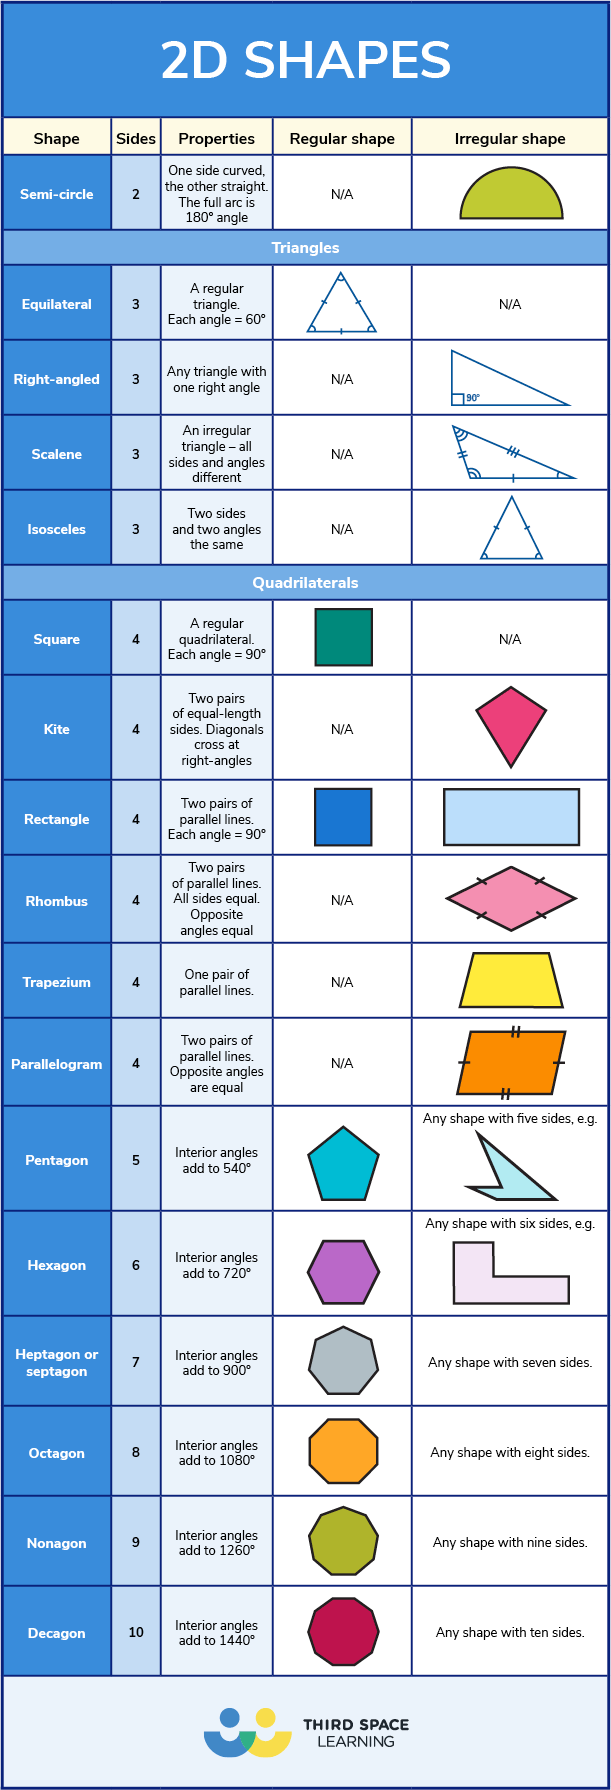 what-are-2d-shapes-explained-for-primary-school